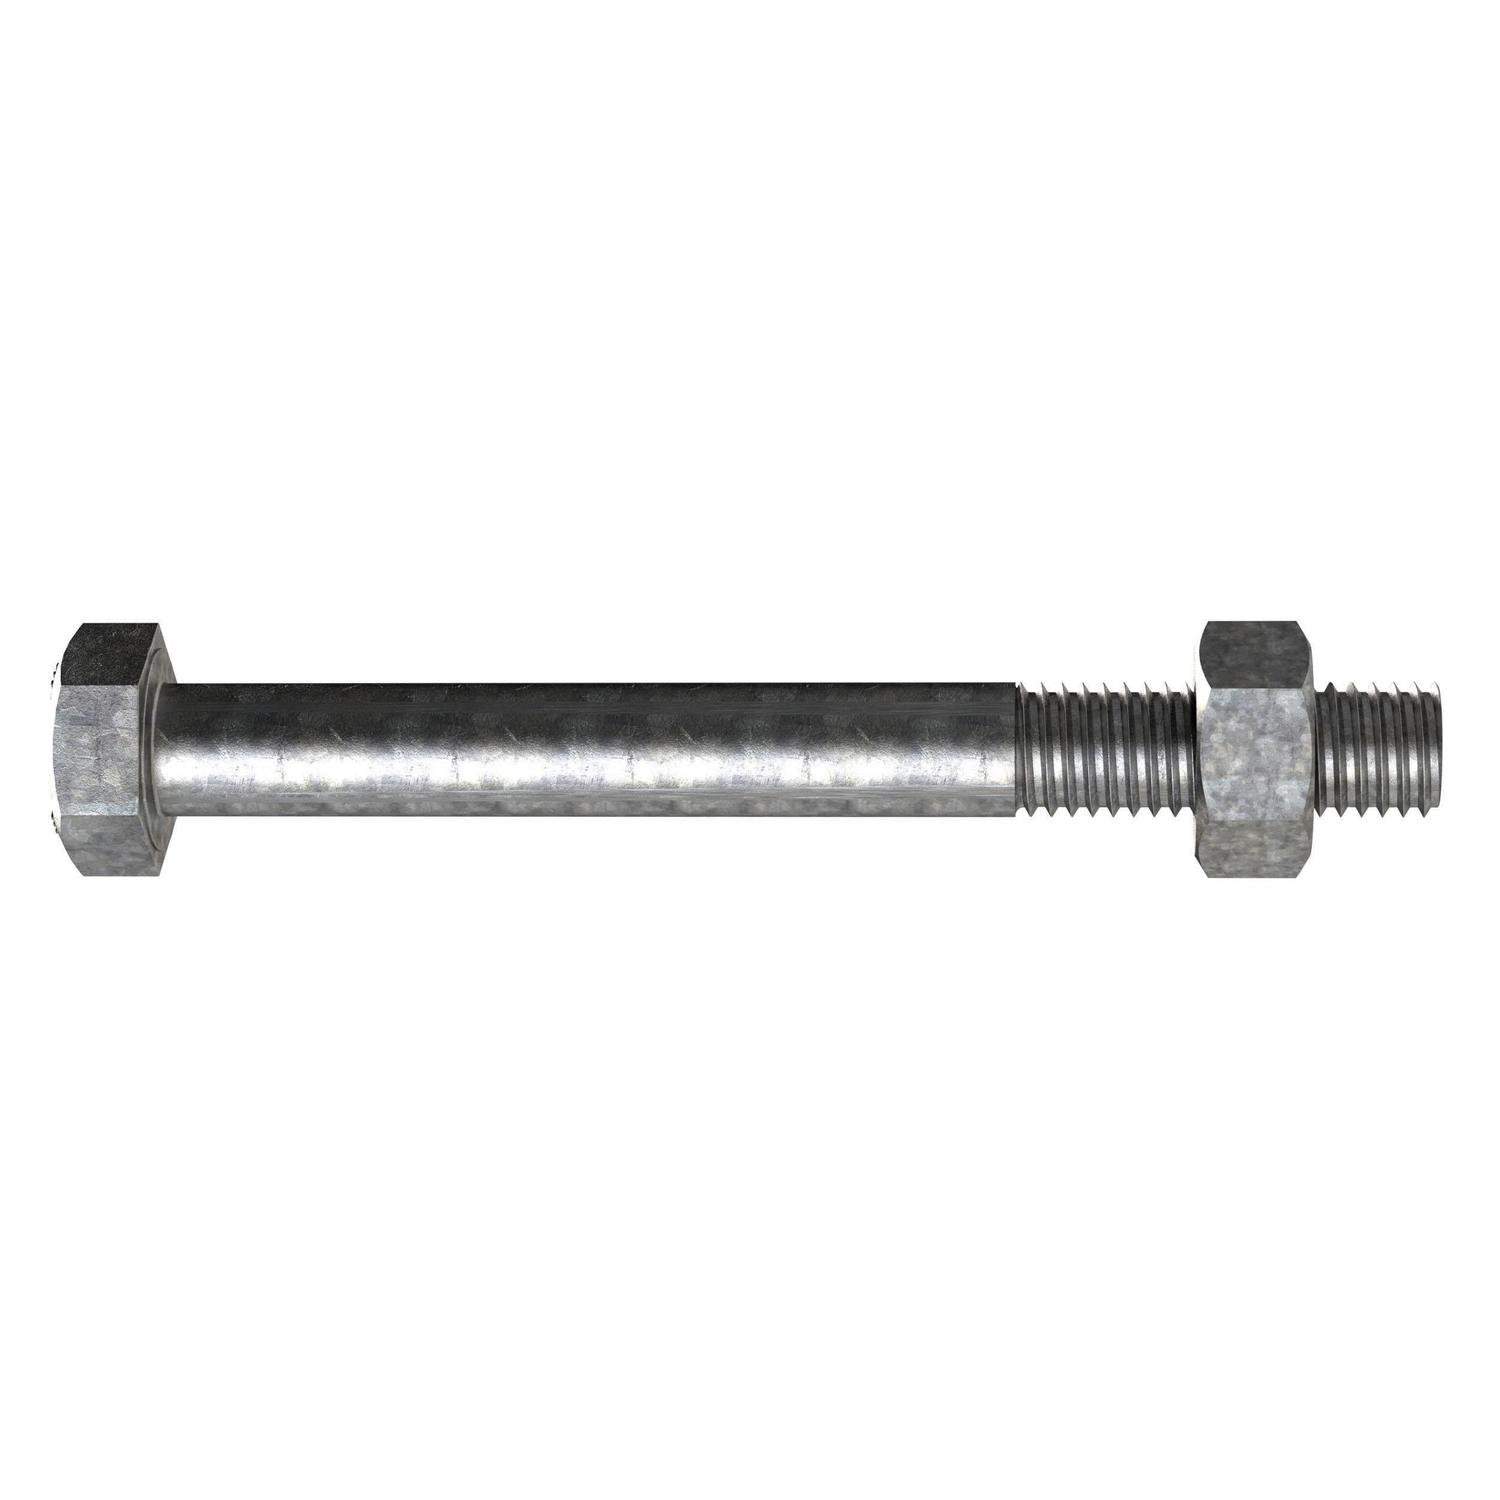 Bremick Engineer Bolts M12 X 280Mm Galvanised